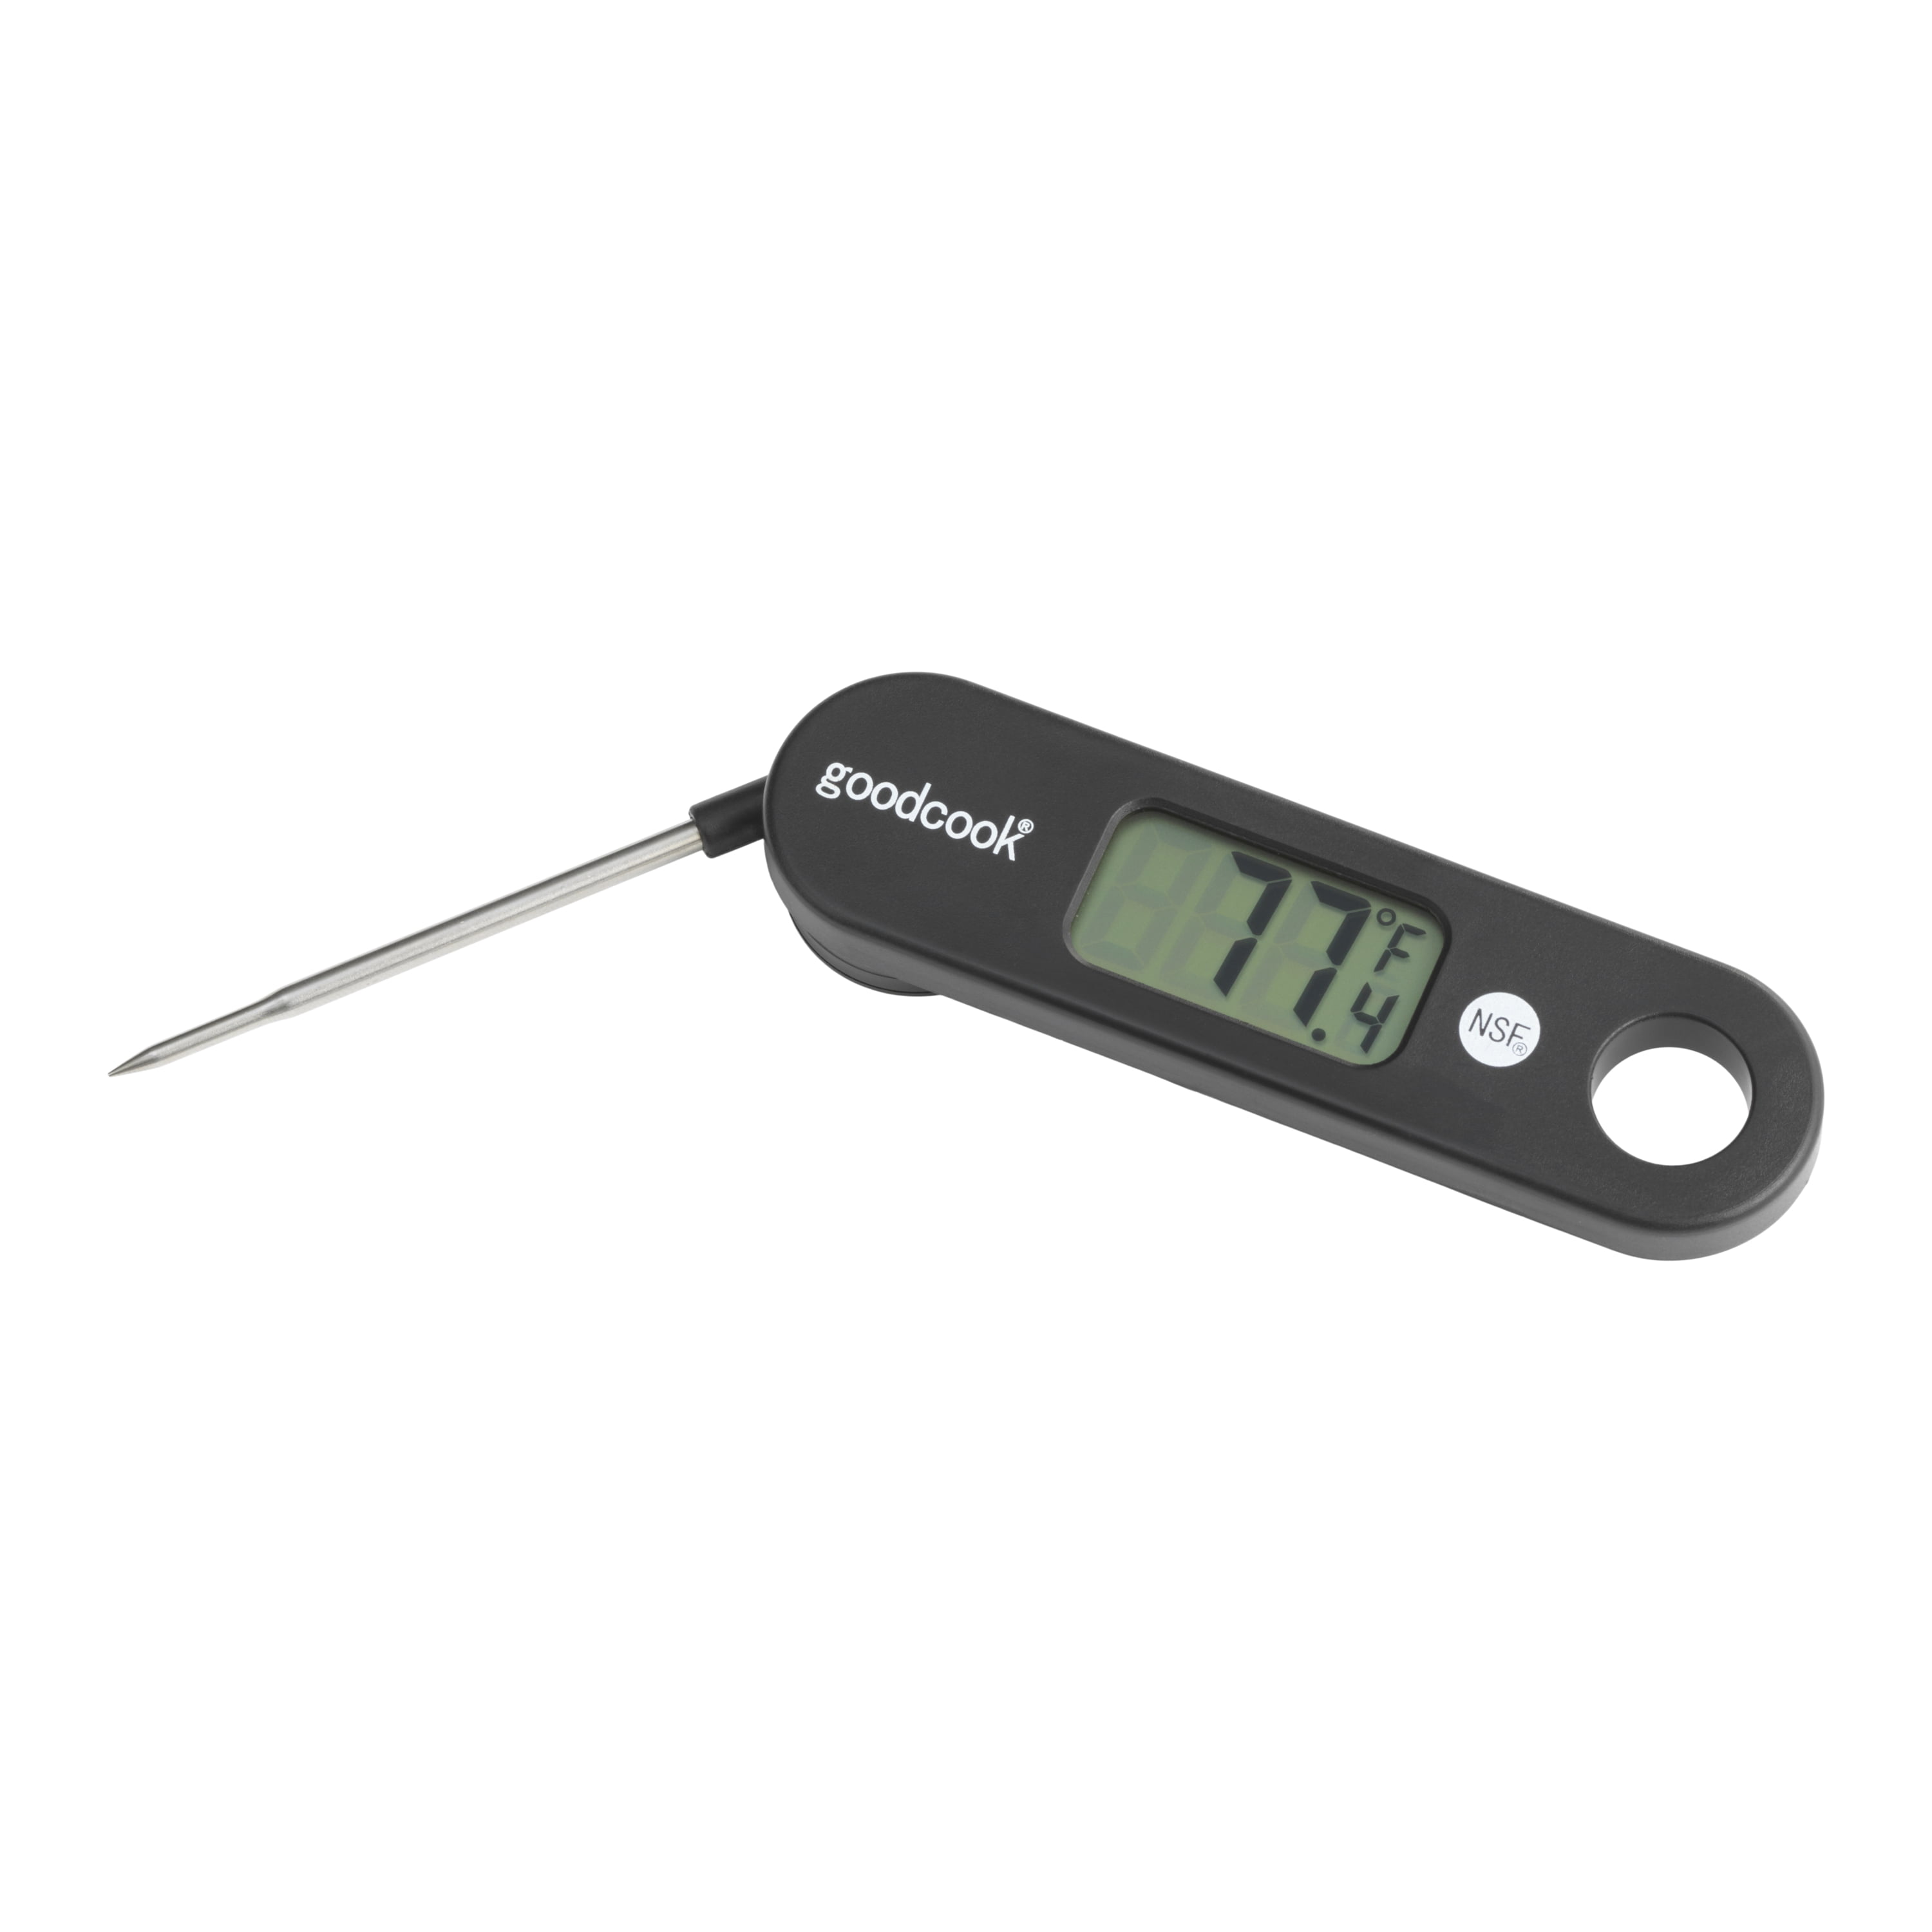 Digital Probe Thermometer Food Temp Sensor for Cooking Baking Meat - Black,Red,Silver Tone